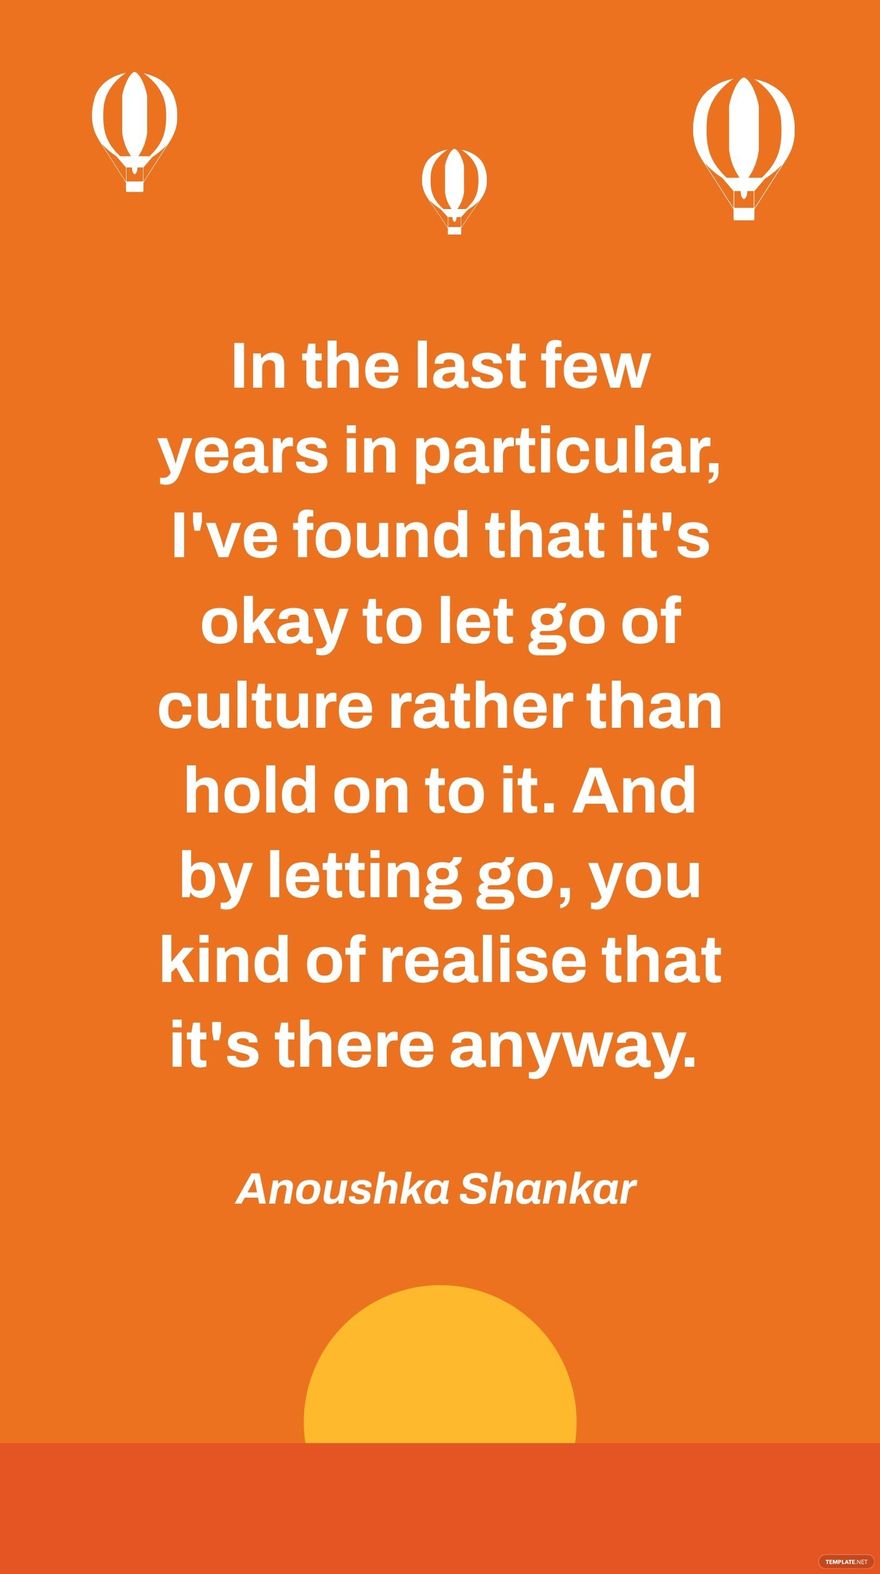 Anoushka Shankar - In the last few years in particular, I've found that it's okay to let go of culture rather than hold on to it. And by letting go, you kind of realise that it's there anyway. 